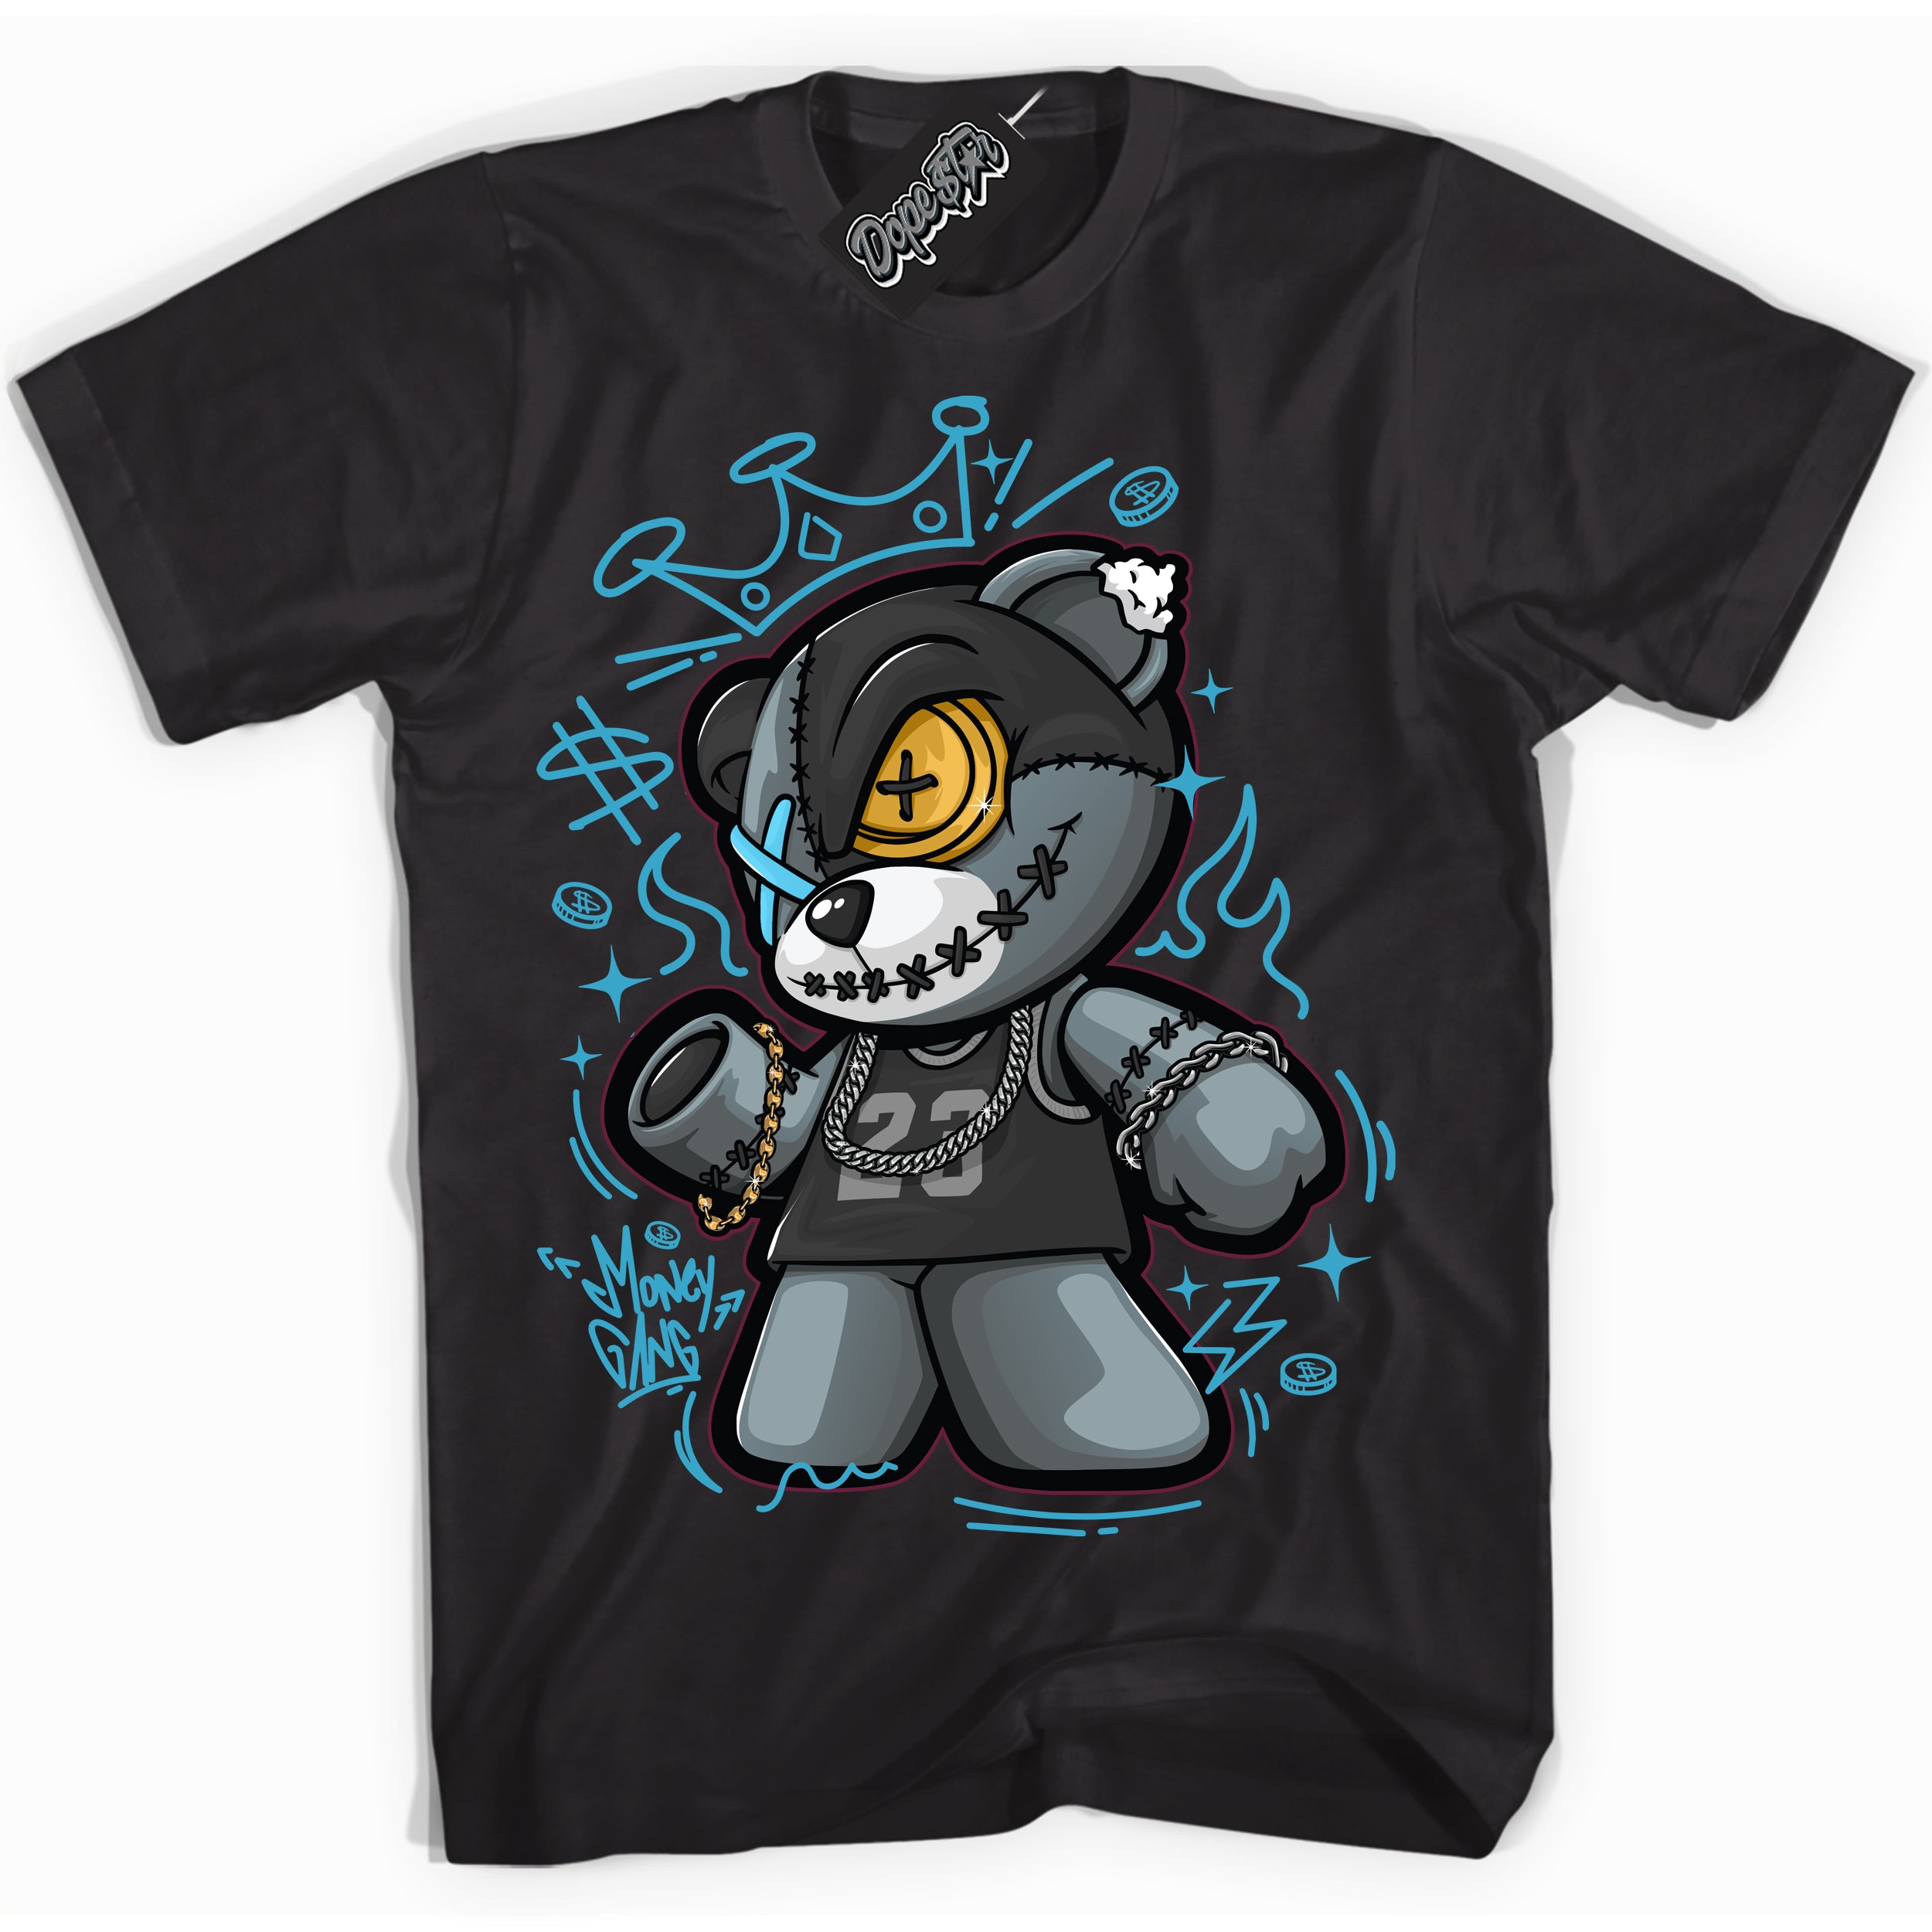 Cool Black Shirt with “ Money Gang Bear” design that perfectly matches Aqua 5s Sneakers.